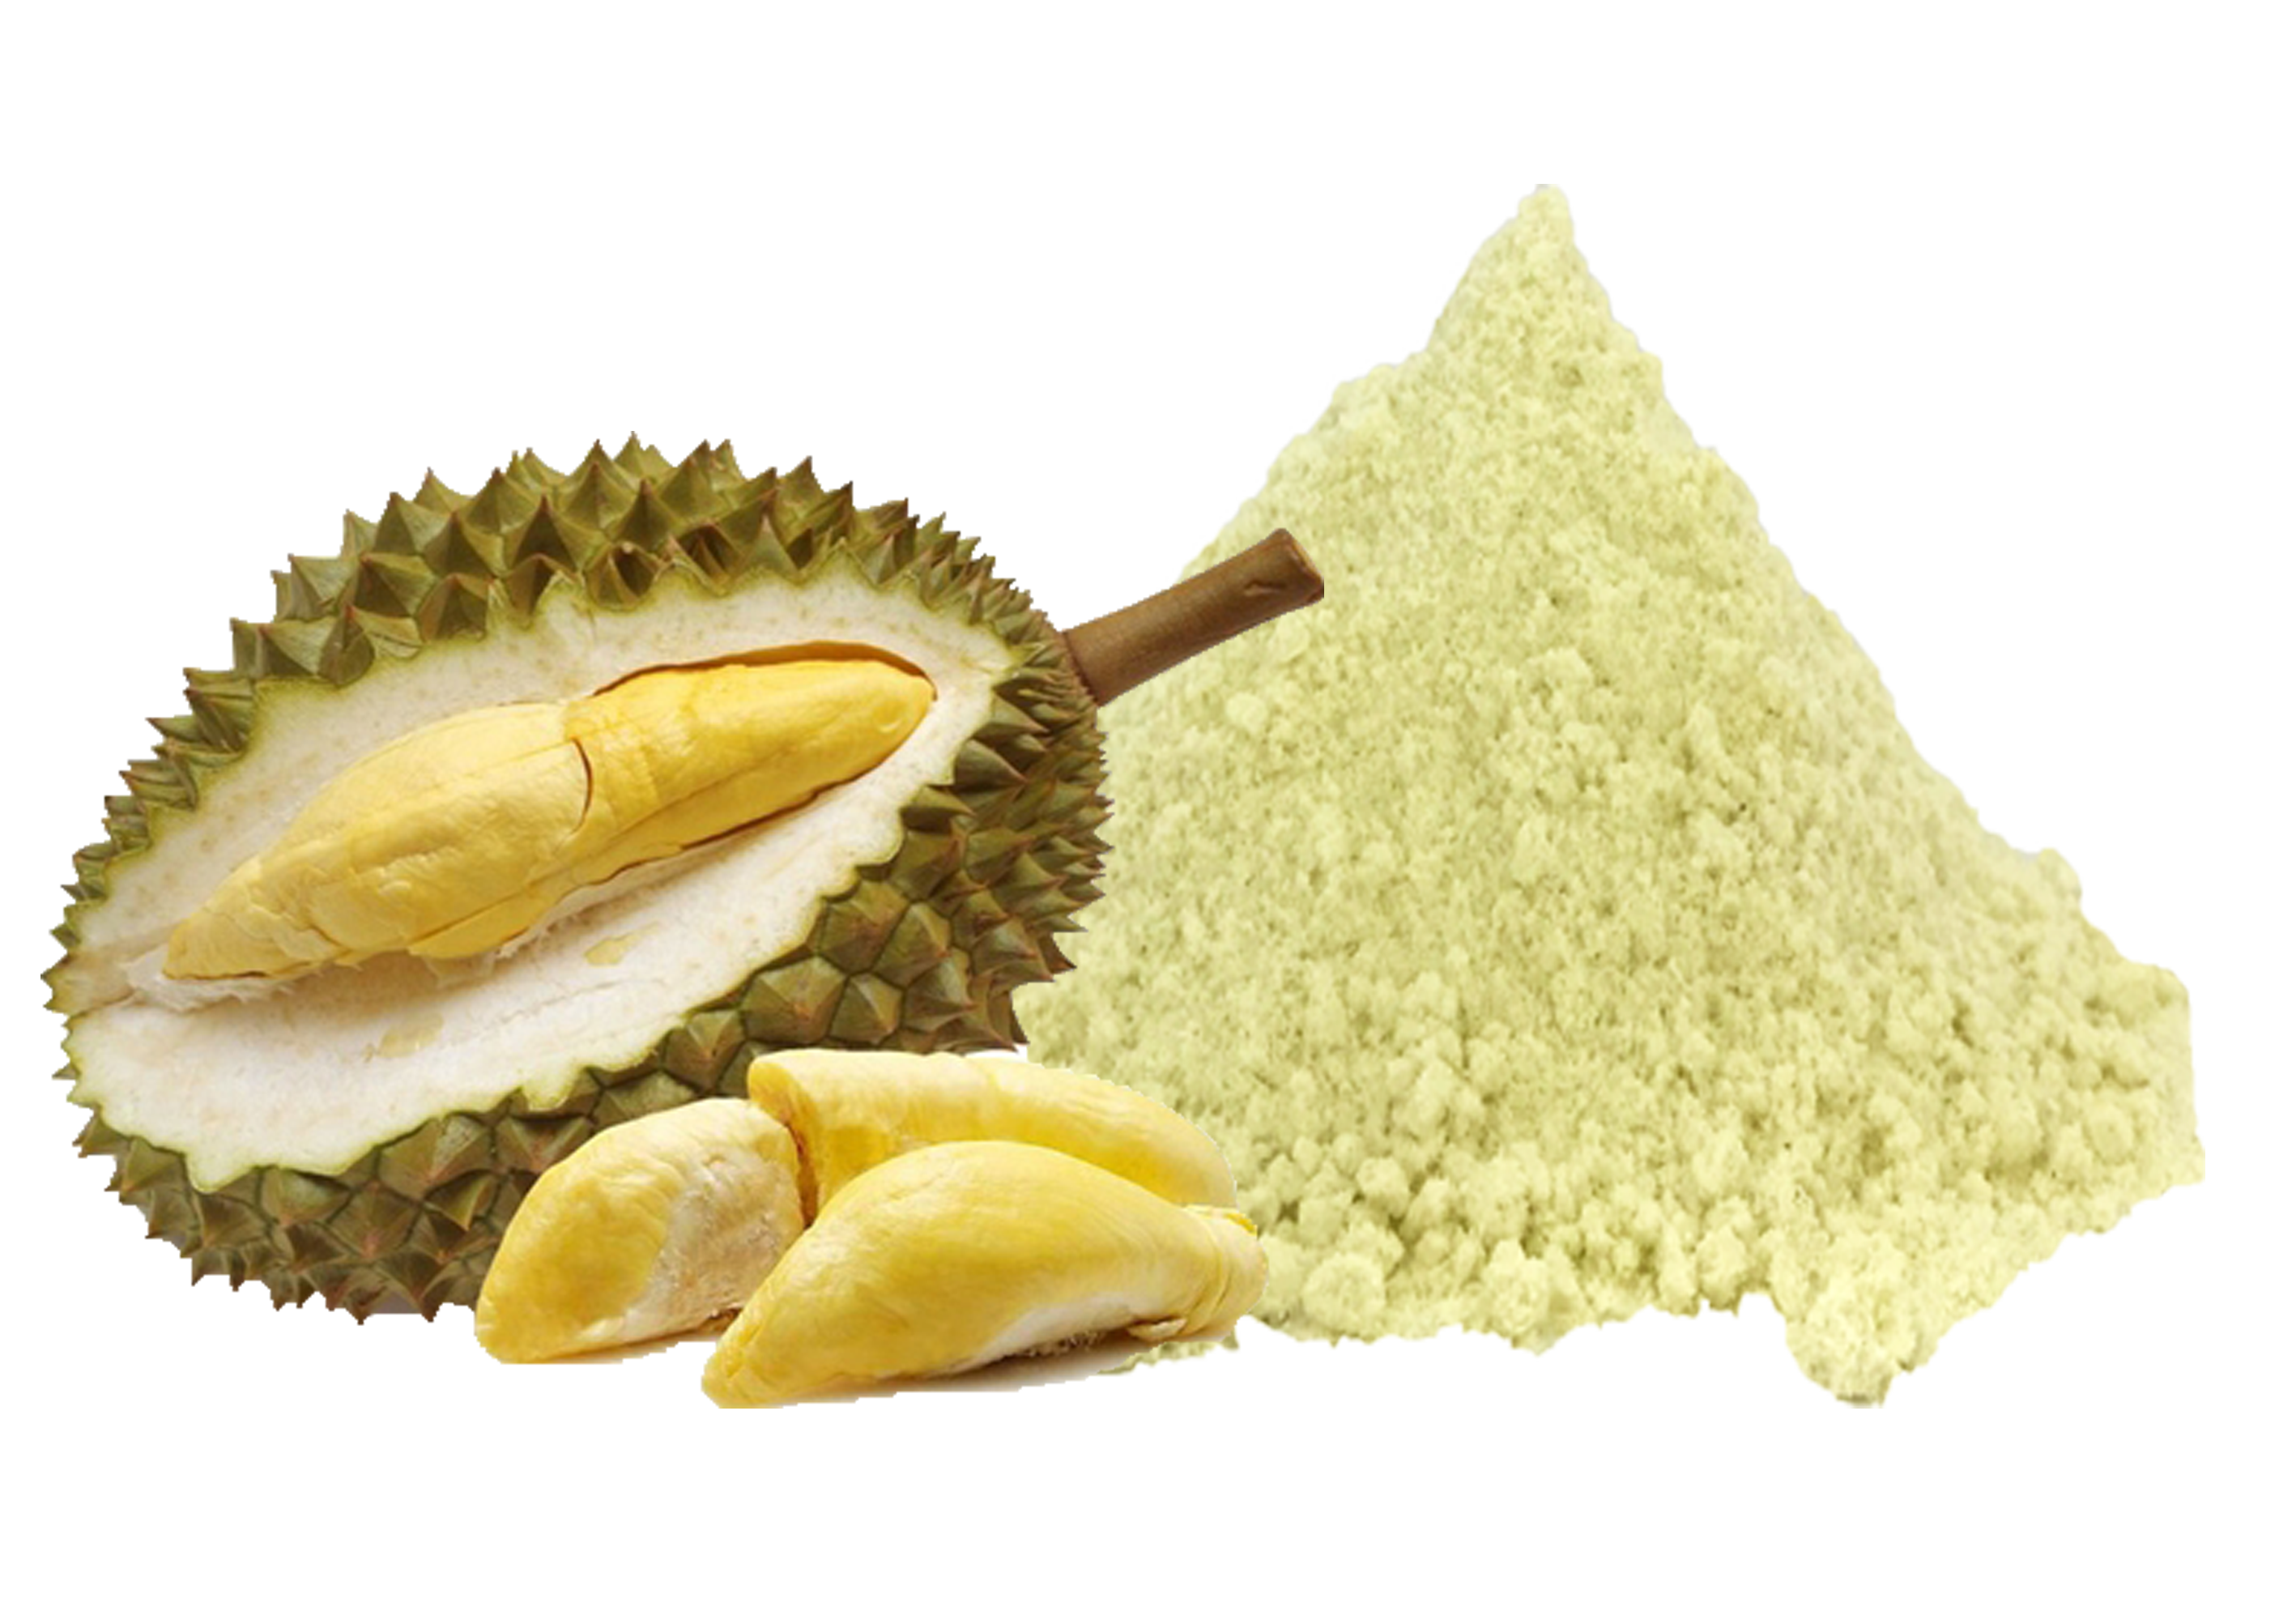 Dry Durian